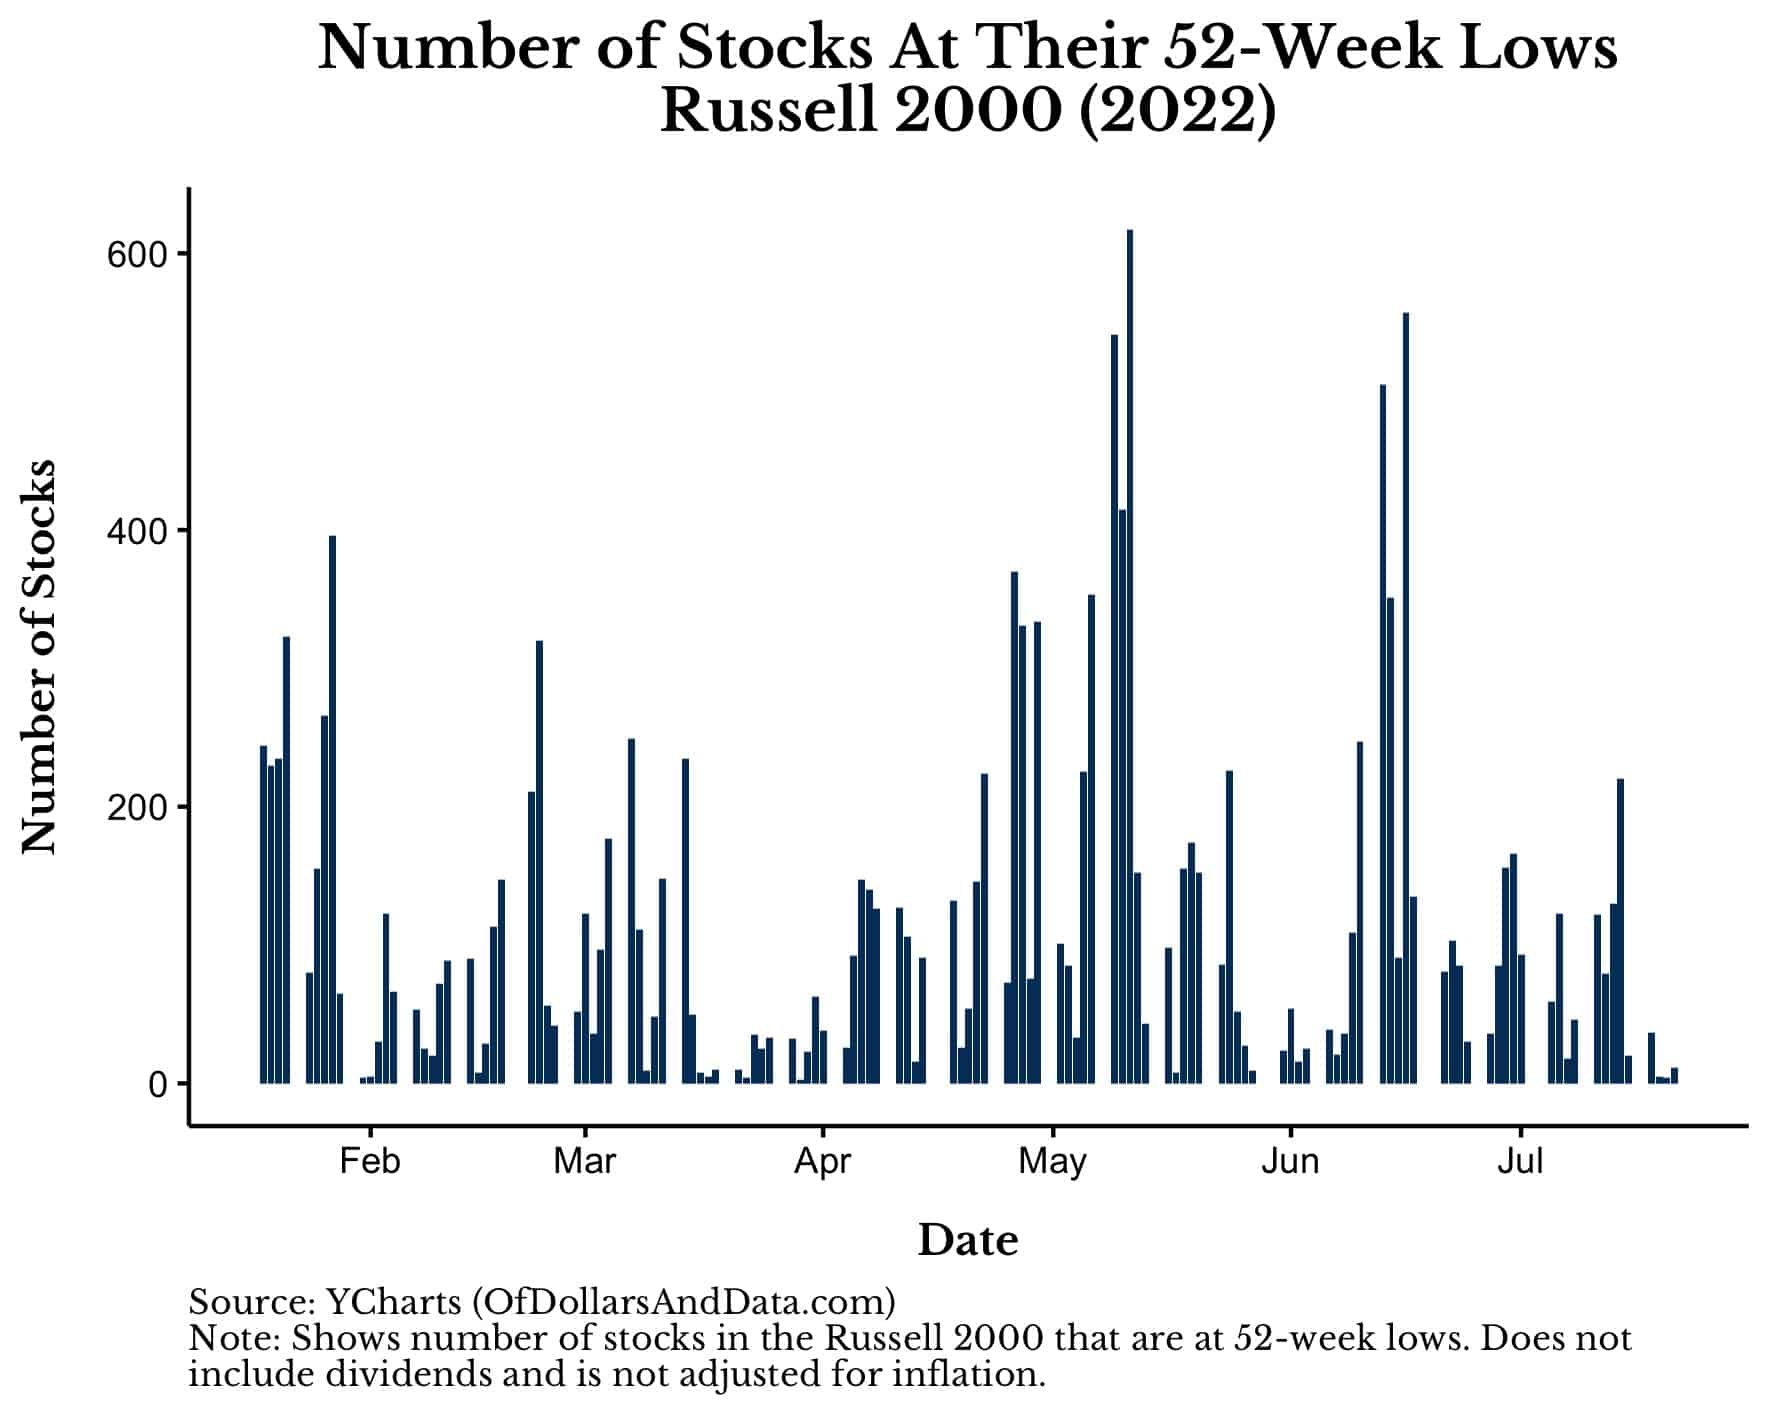 Number of Russell 2000 stocks at their 52-week lows in 2022